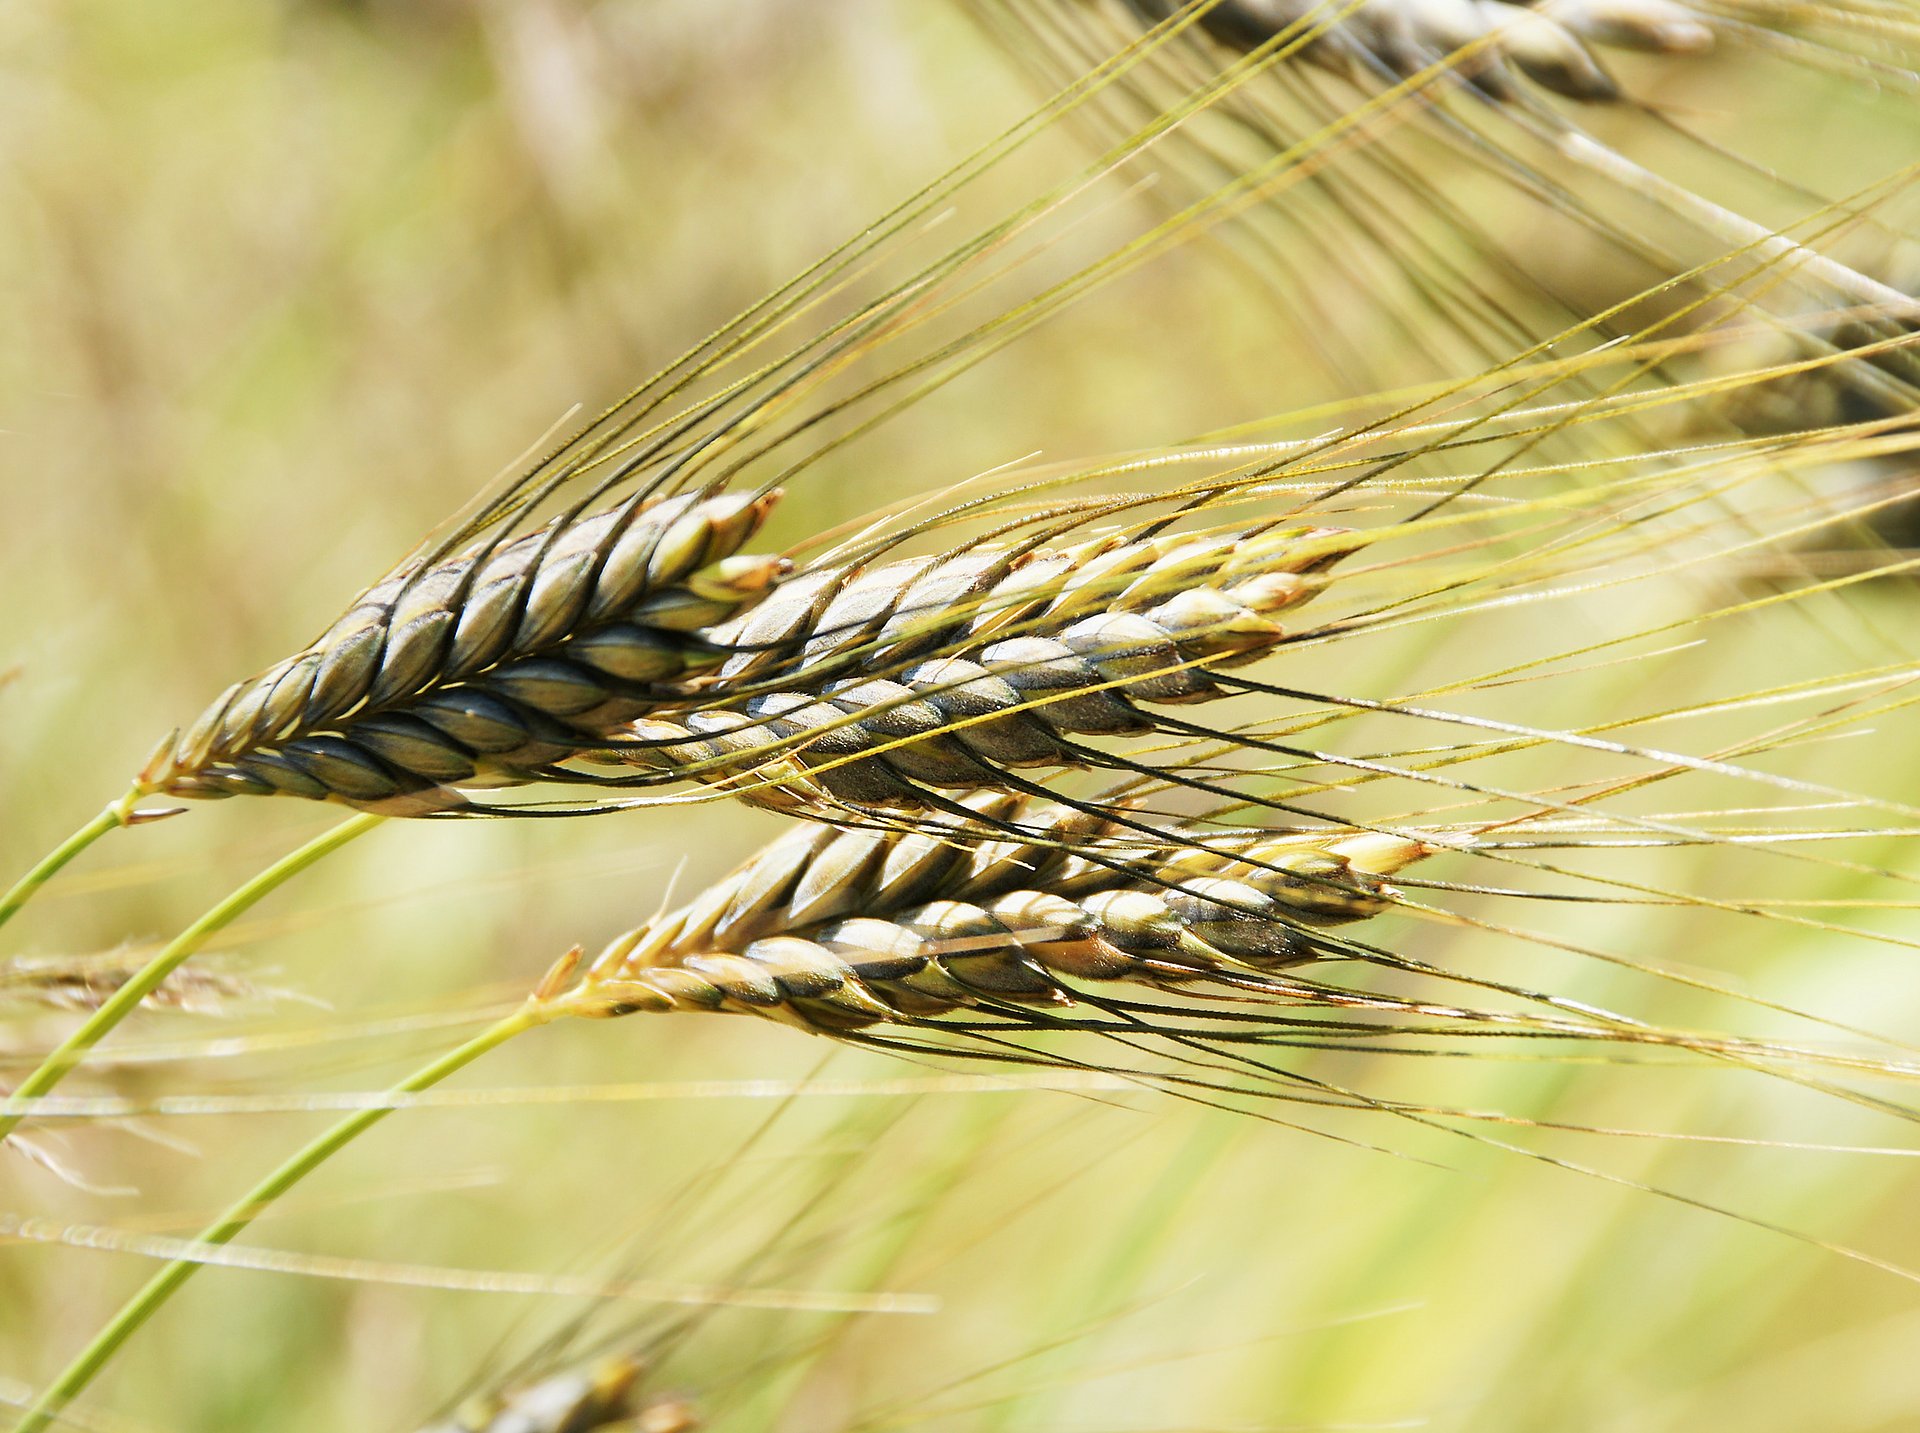 Wild Emmer is the origin of almost all cultivated varieties of wheat and one of the oldest cultivated plants. Emmer is closely related to bread and pasta wheat. (Poto: Fotolia/ J. Mühlbauer exclus.)